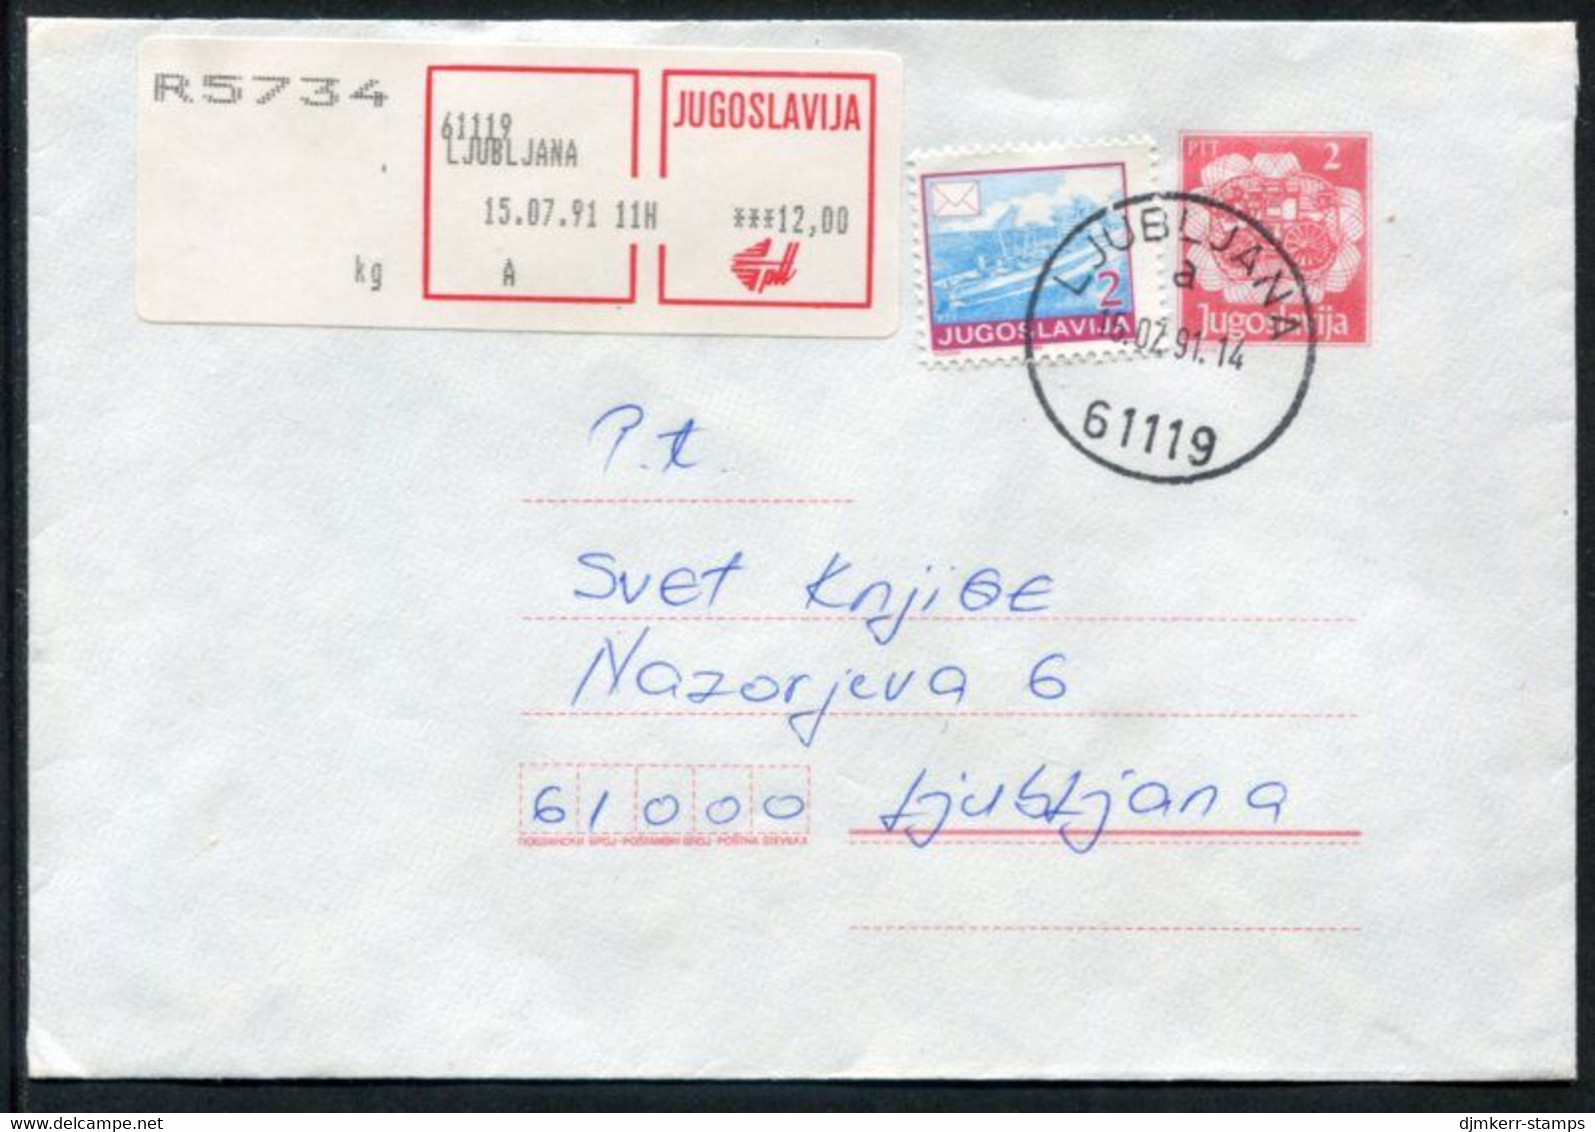 YUGOSLAVIA 1990 Mailcoach 2 D. Stationery Envelope Registered With Additional Franking.  Michel U96 - Entiers Postaux